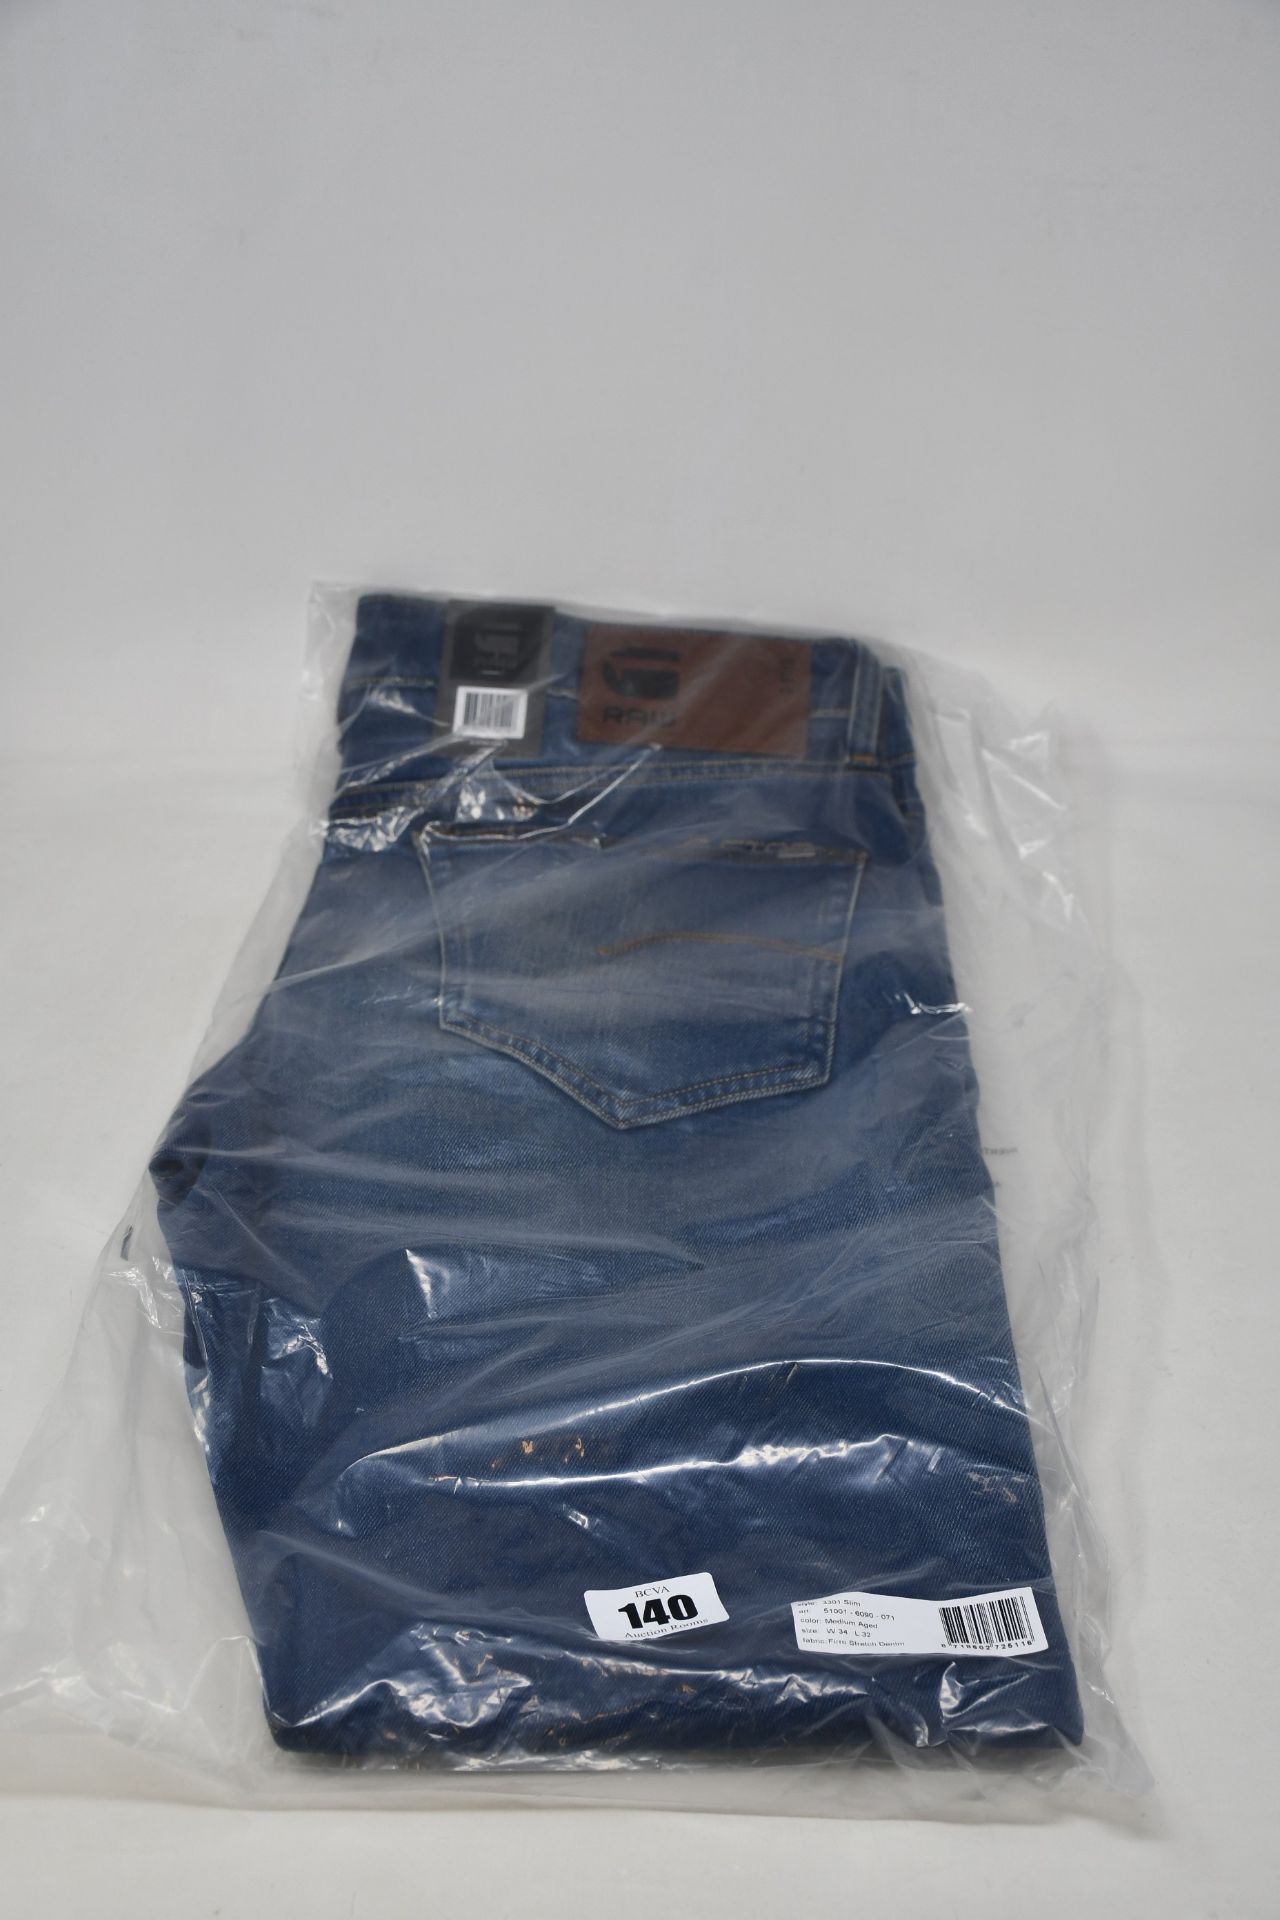 Four pairs of as new G-Star Raw jeans (All W34/L32).